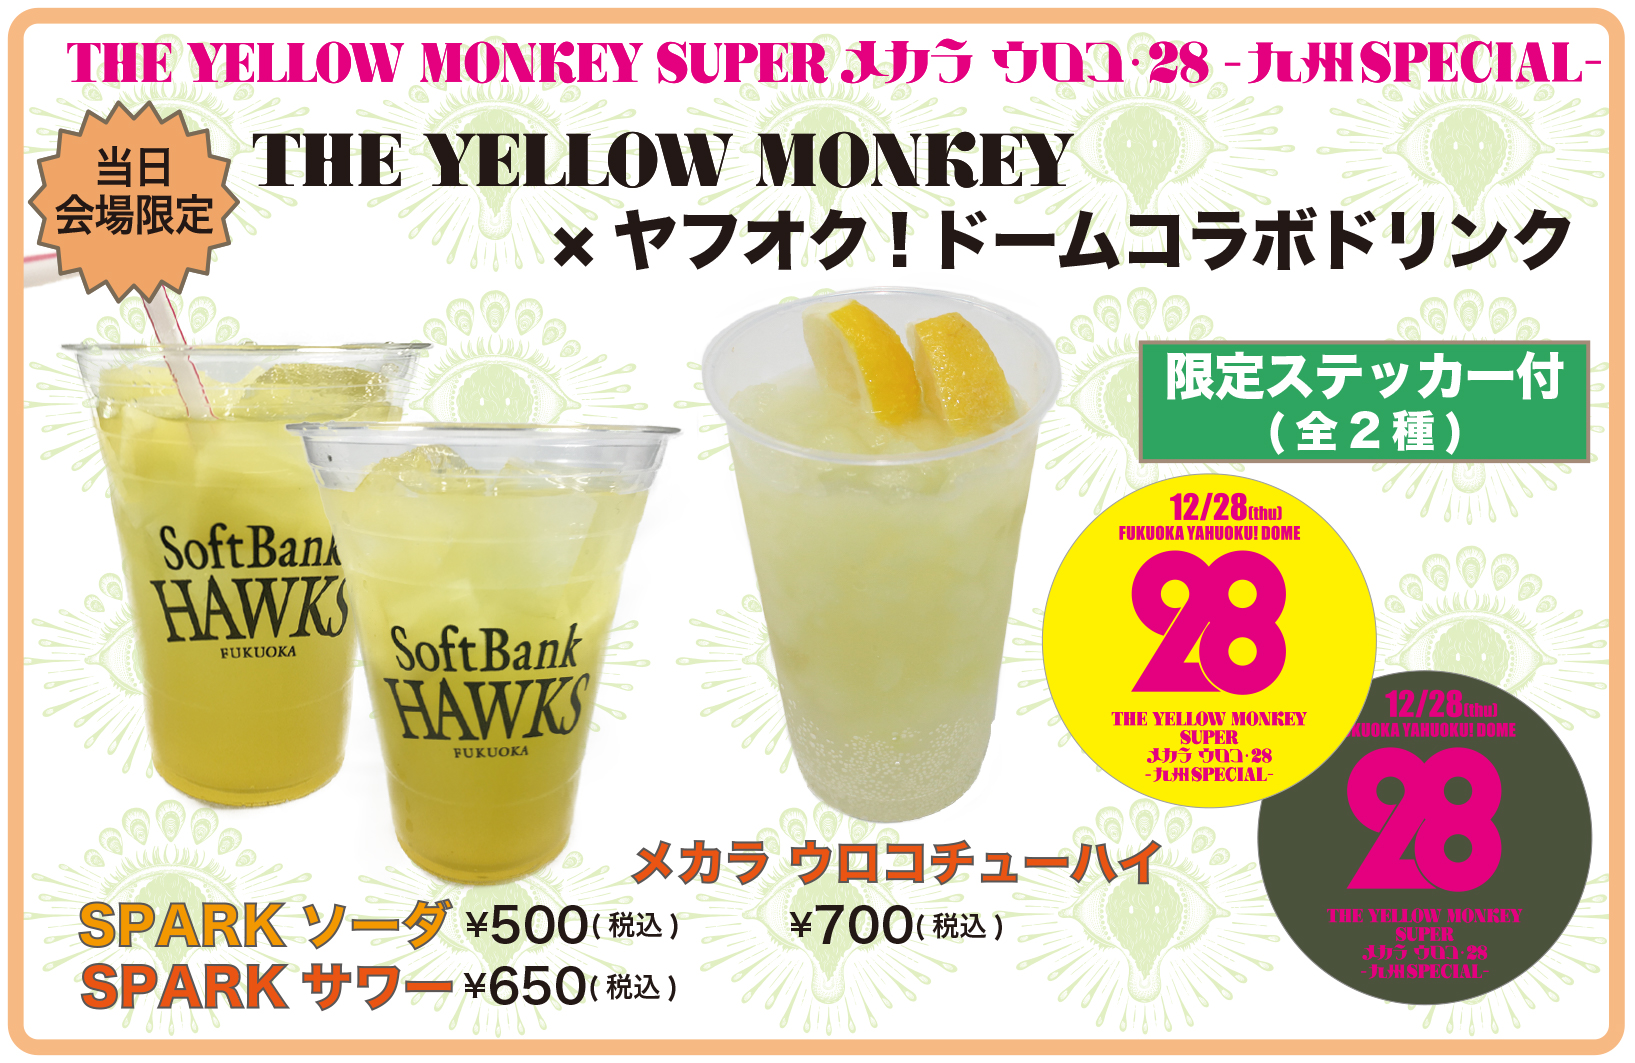 THE YELLOW MONKEY SUPER メカラ ウロコ・28 -九州SPECIAL- 」SPECIAL SITE